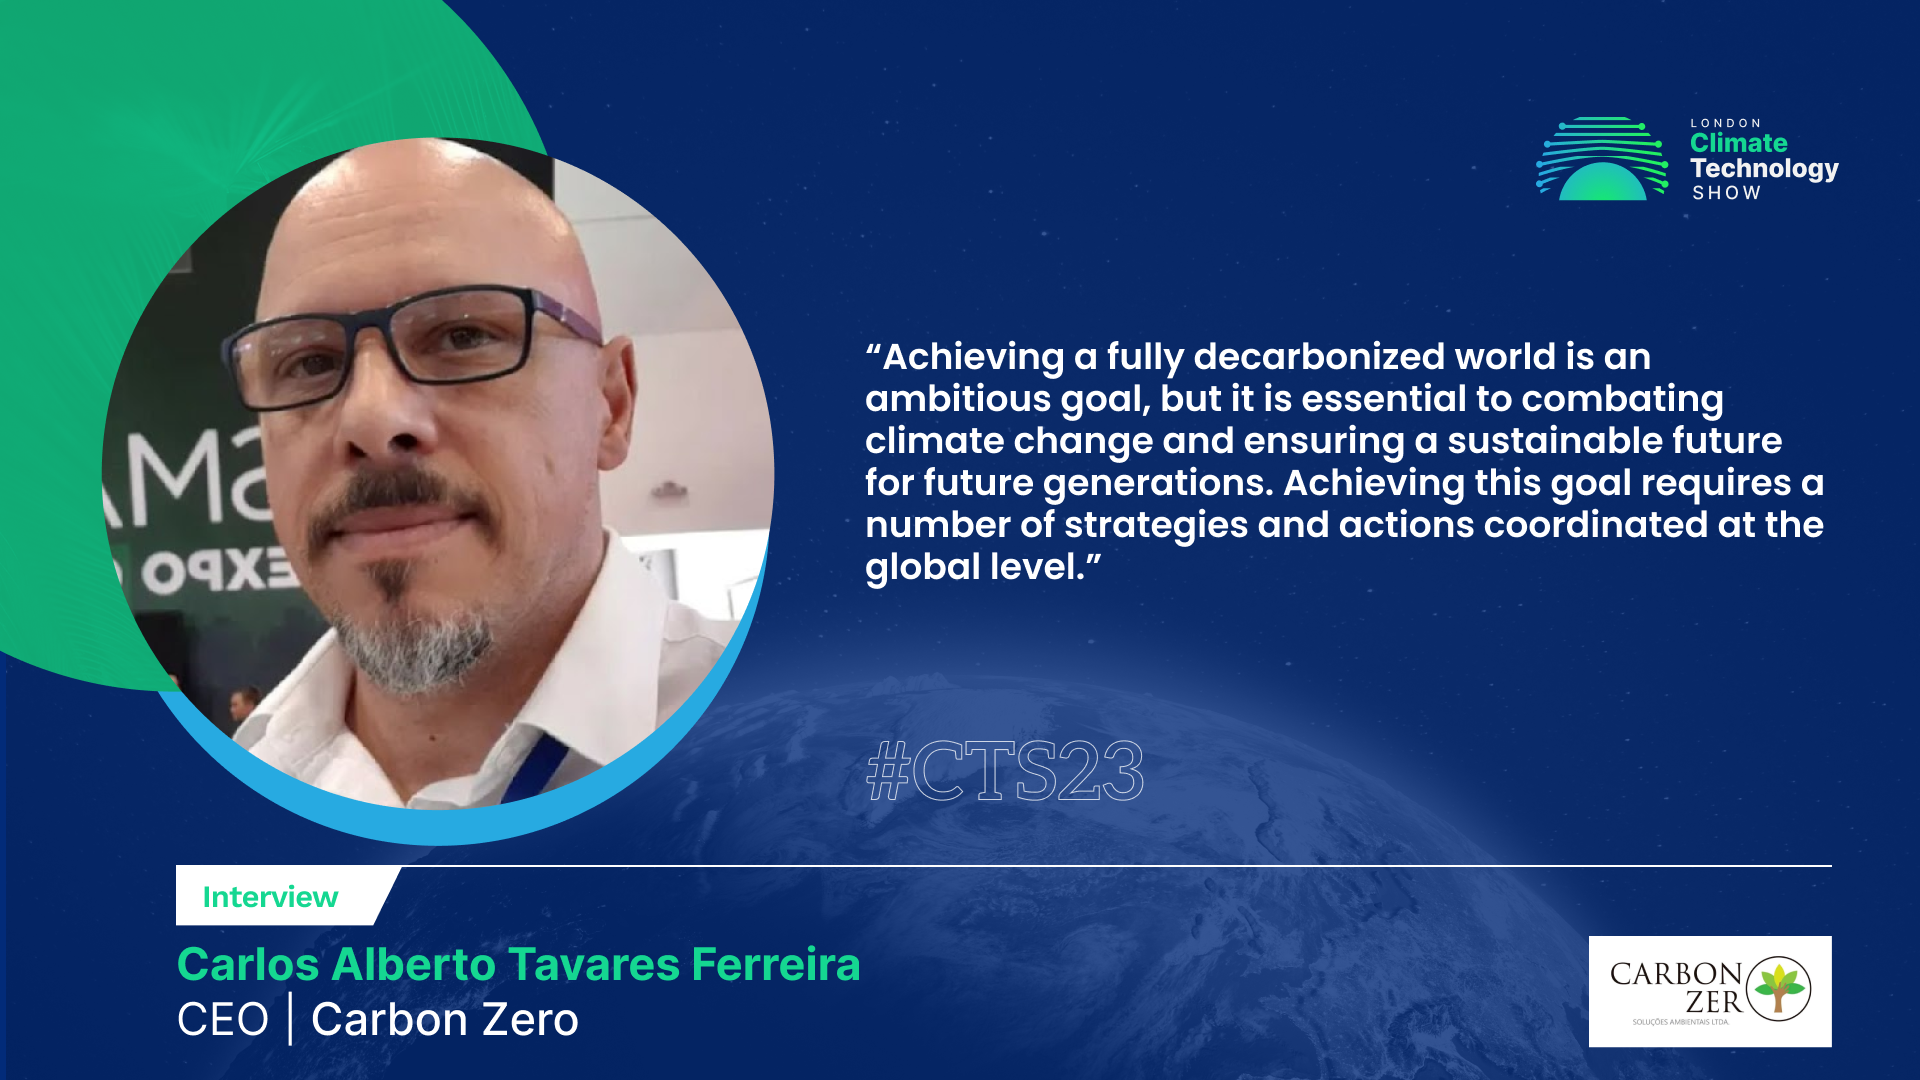 An insightful Q&A session with Carlos Alberto Tavares Ferreira, the CEO of Carbon Zero and a member of ICC